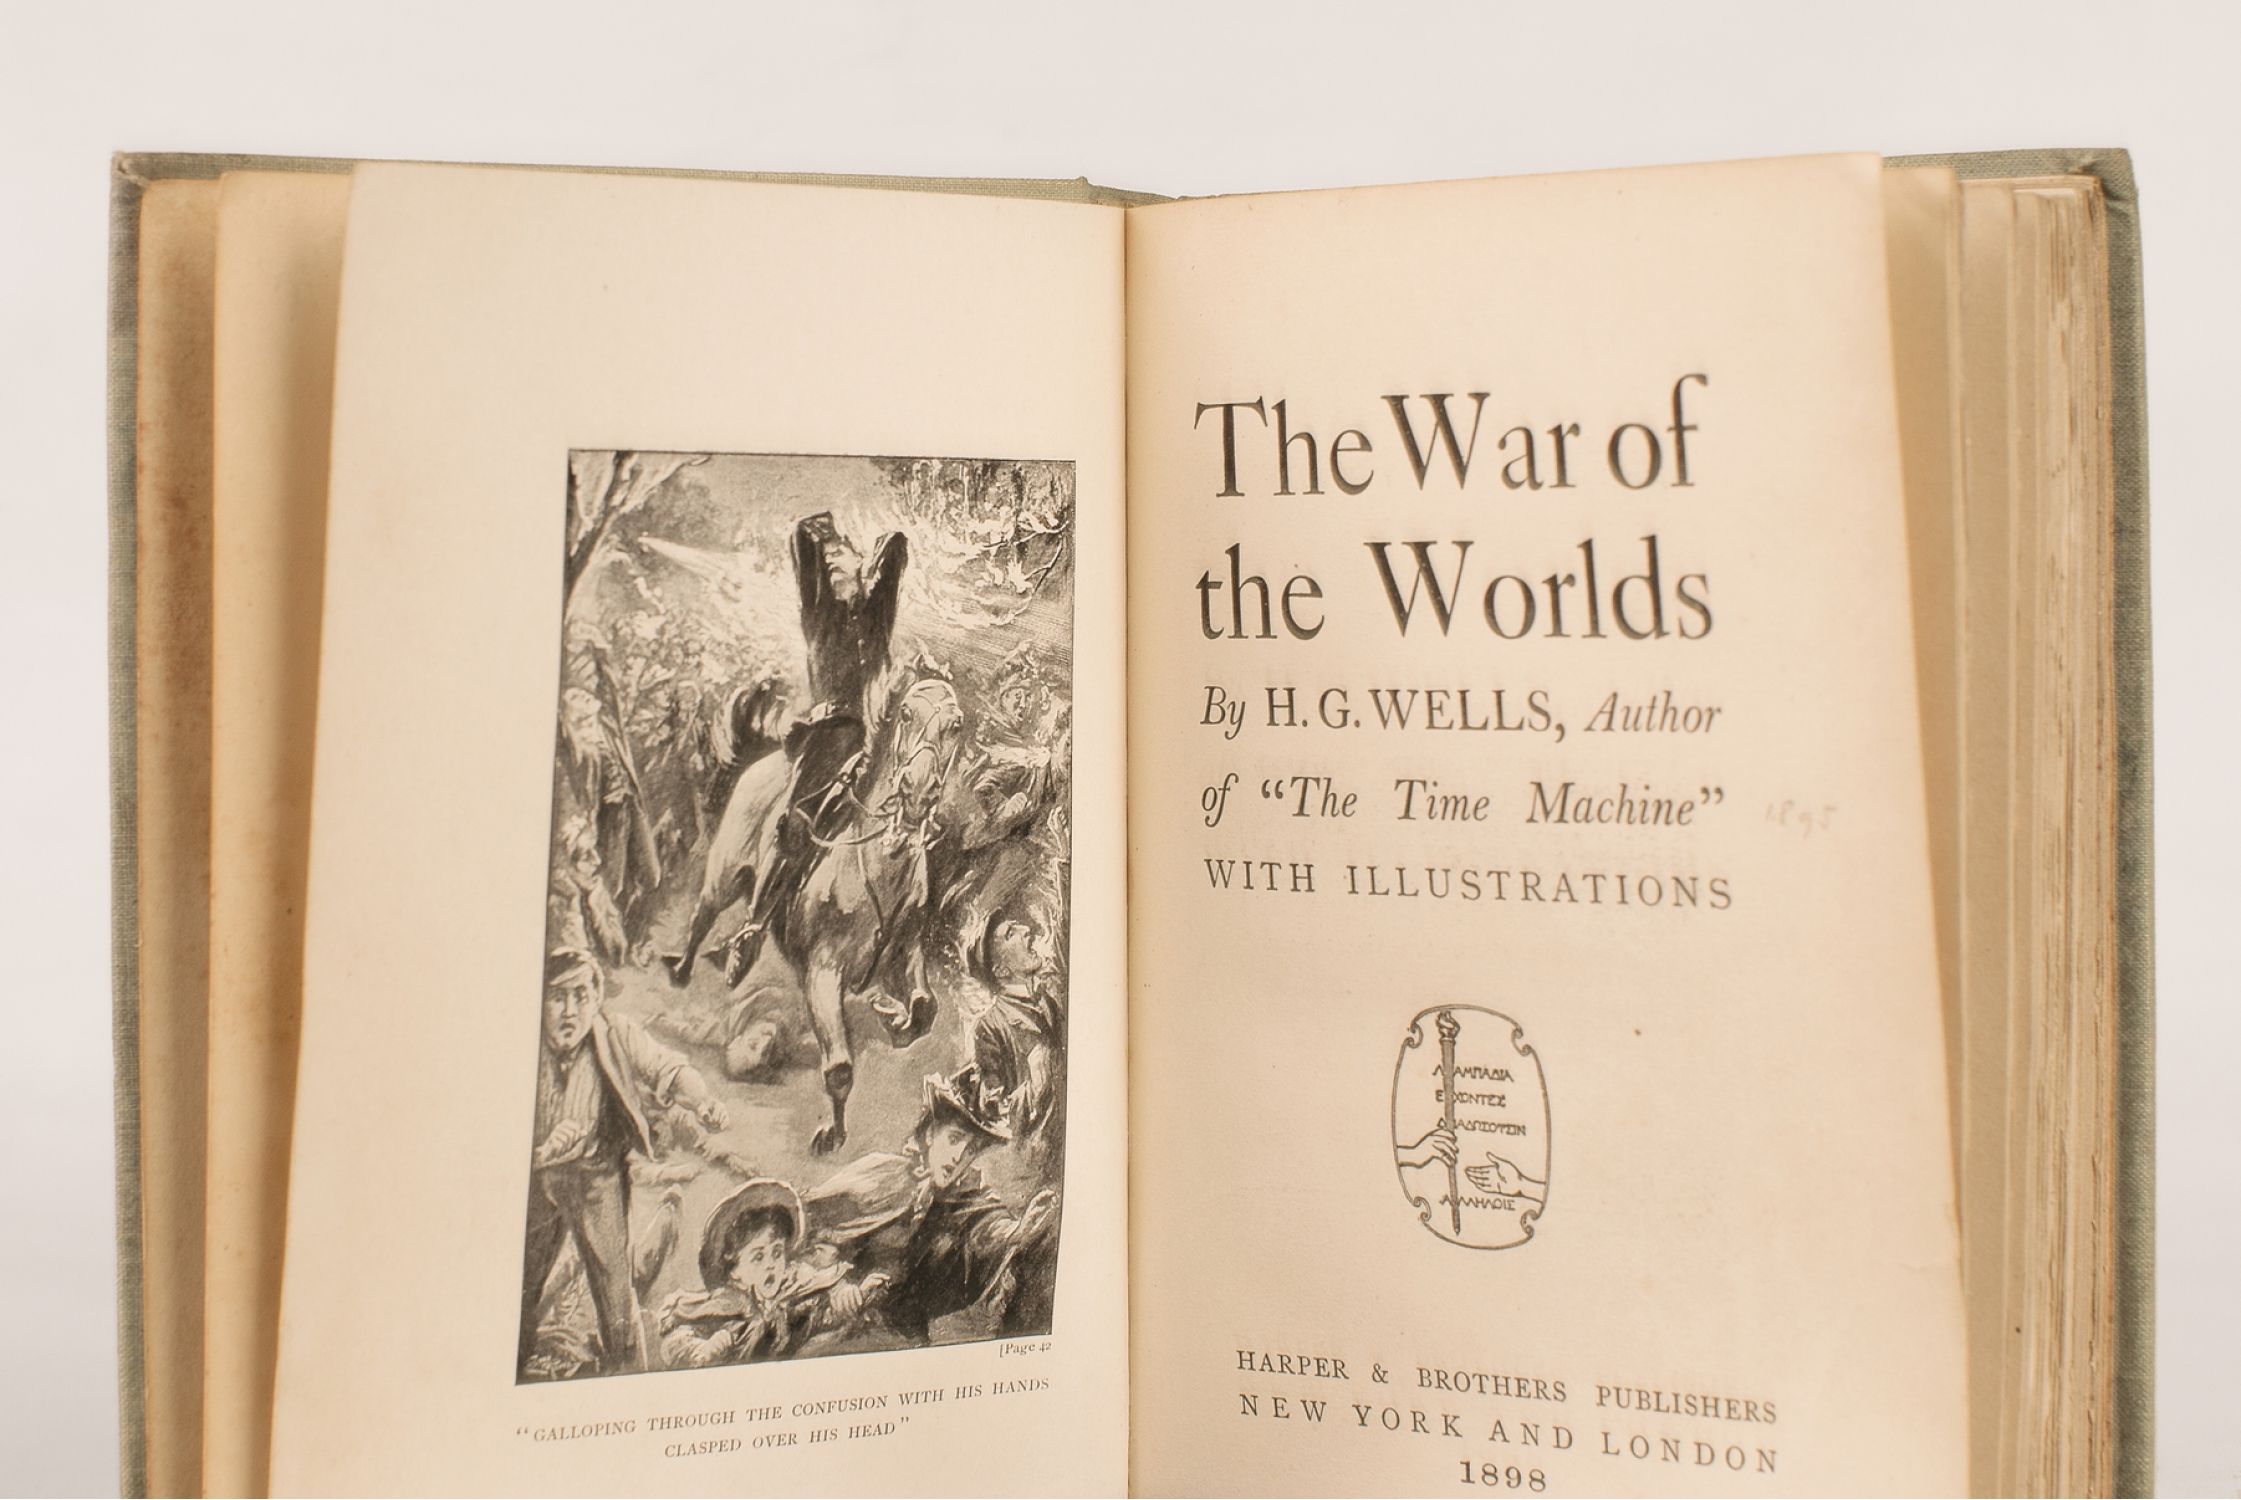 hg wells war of the worlds first edition